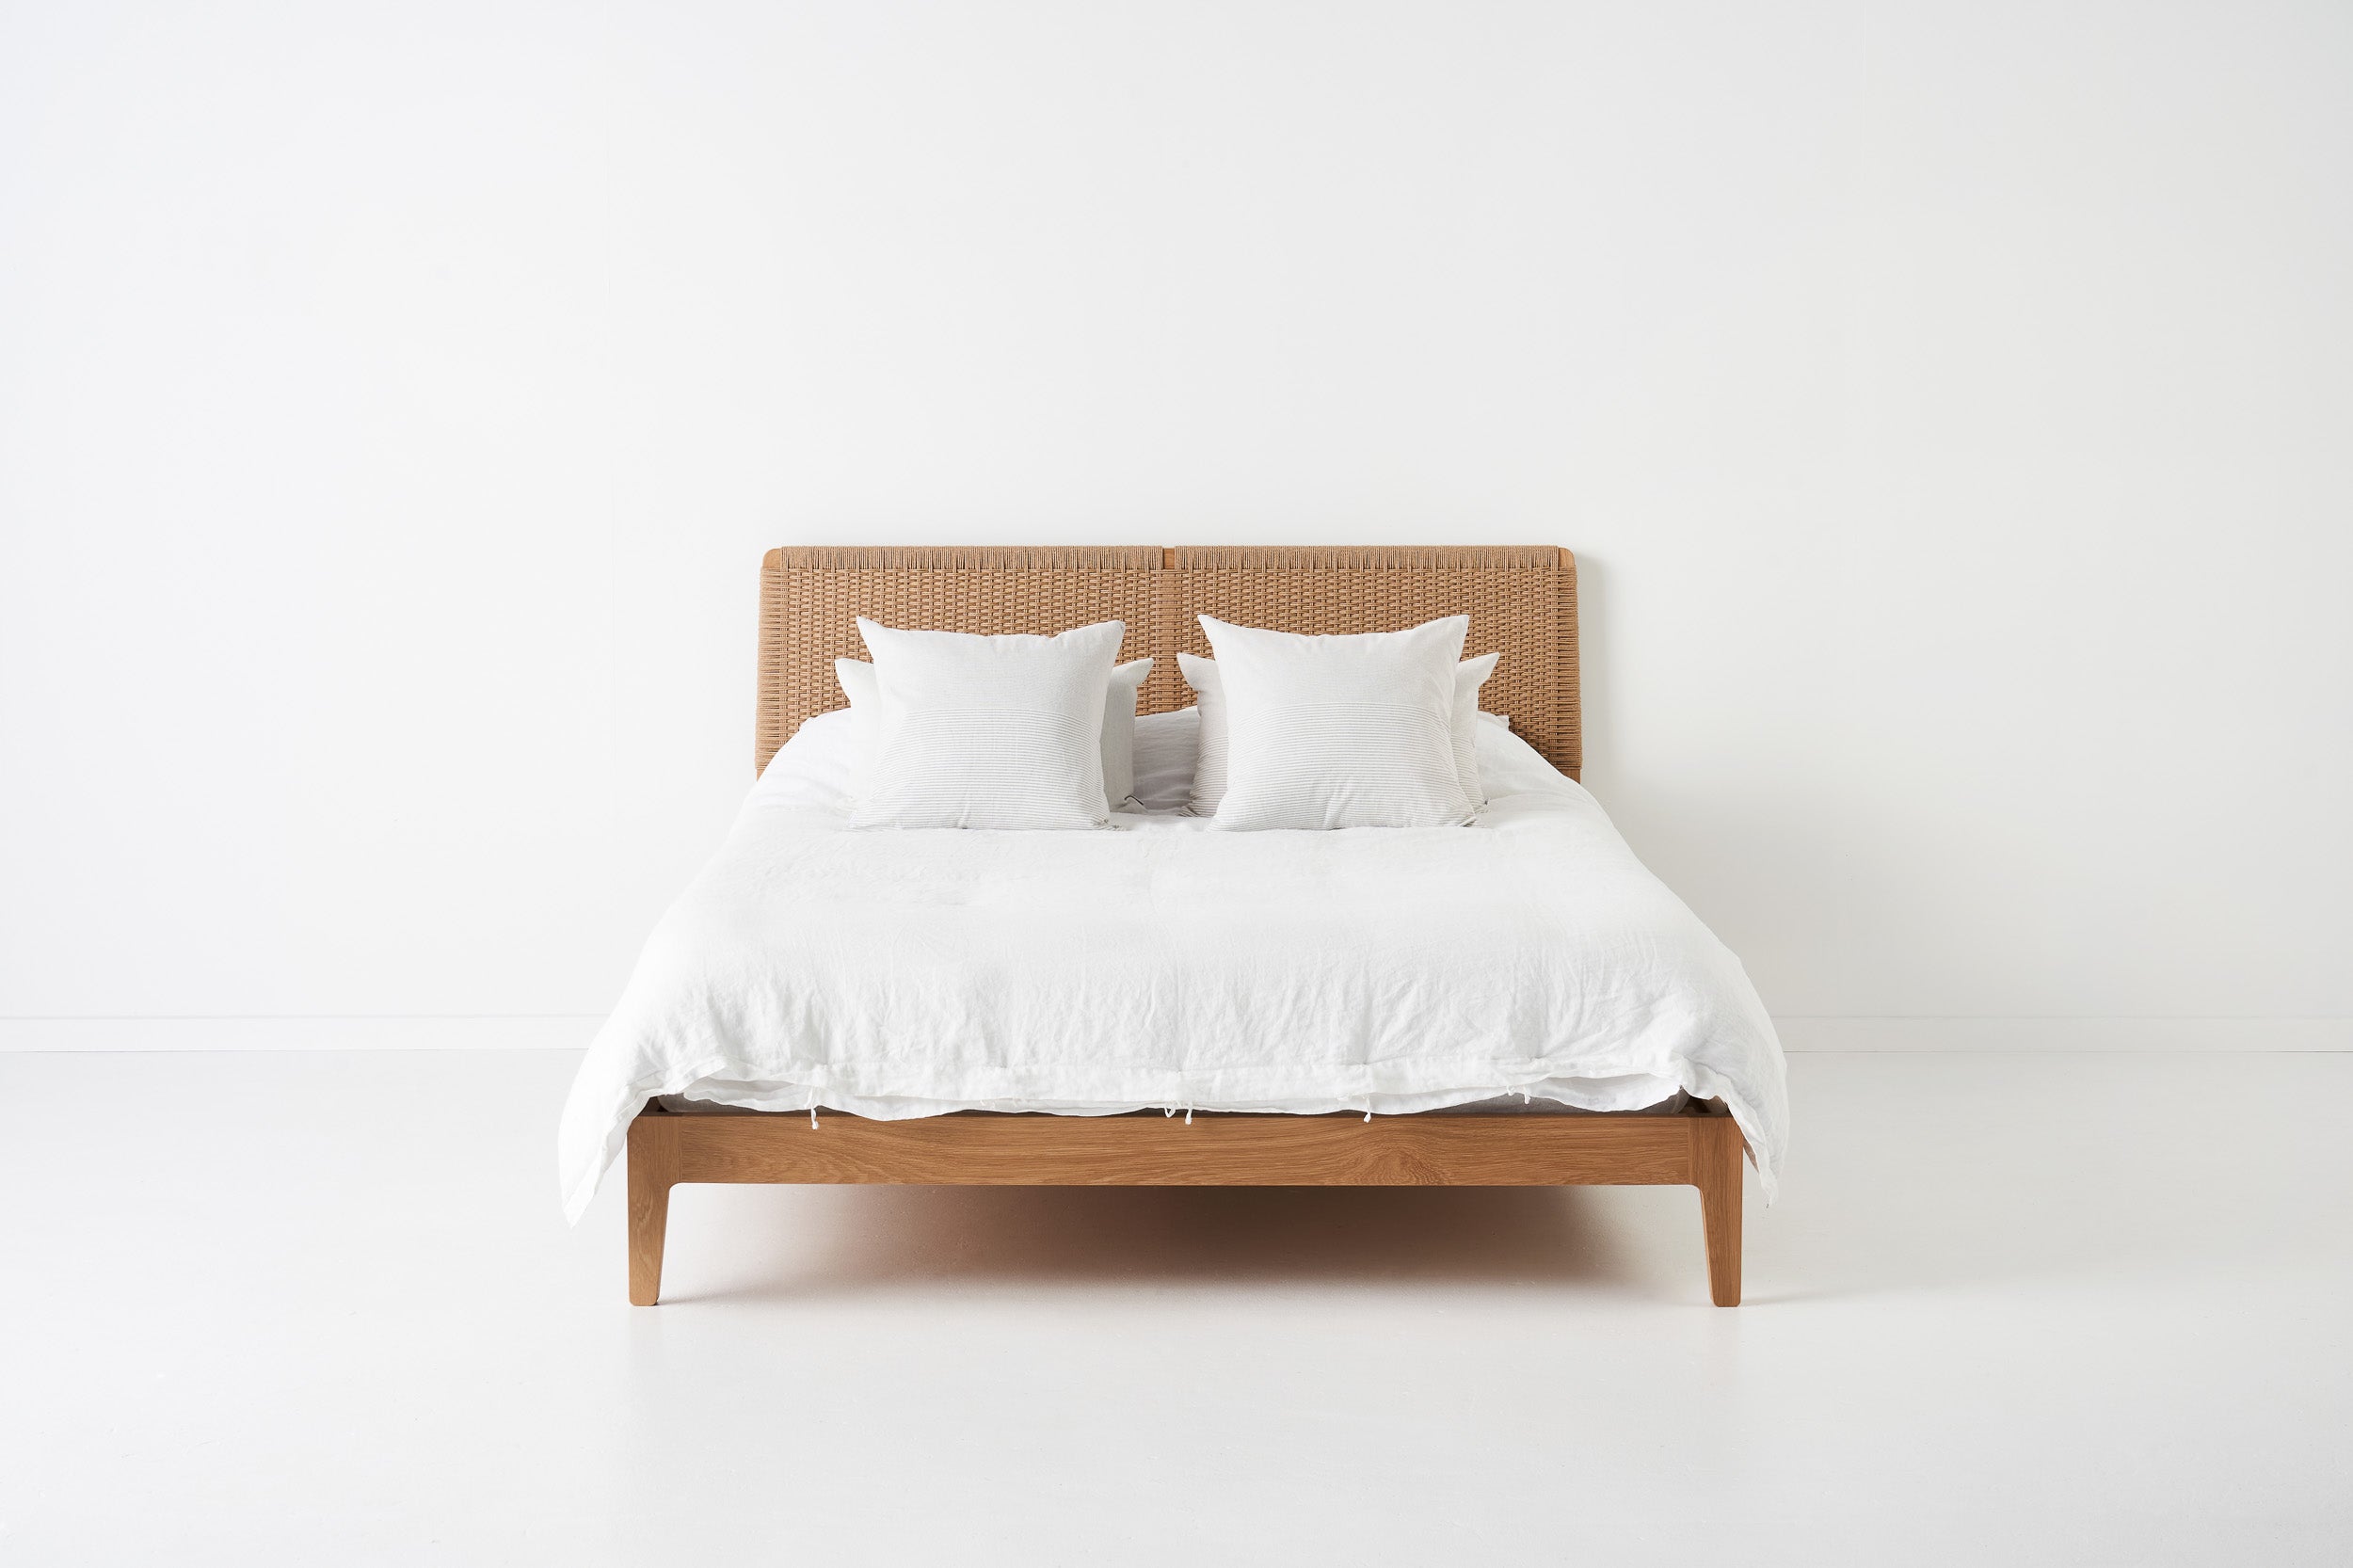 High or Low Bed Frame? What to choose?